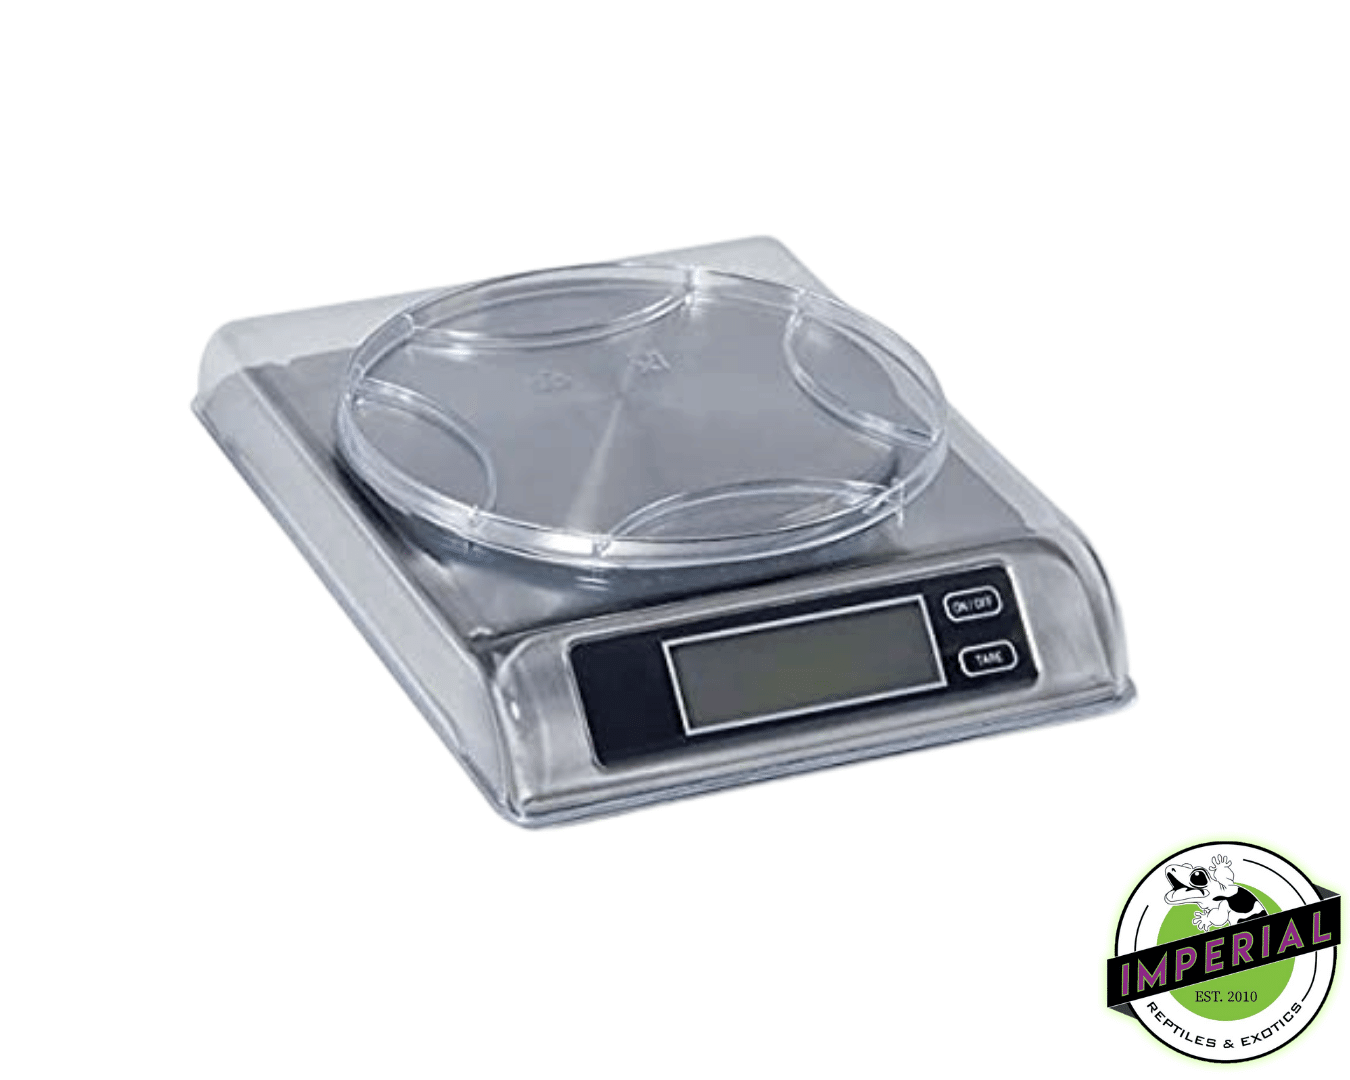 reptile scale for sale online at cheap prices, buy cheap reptile supplies near me